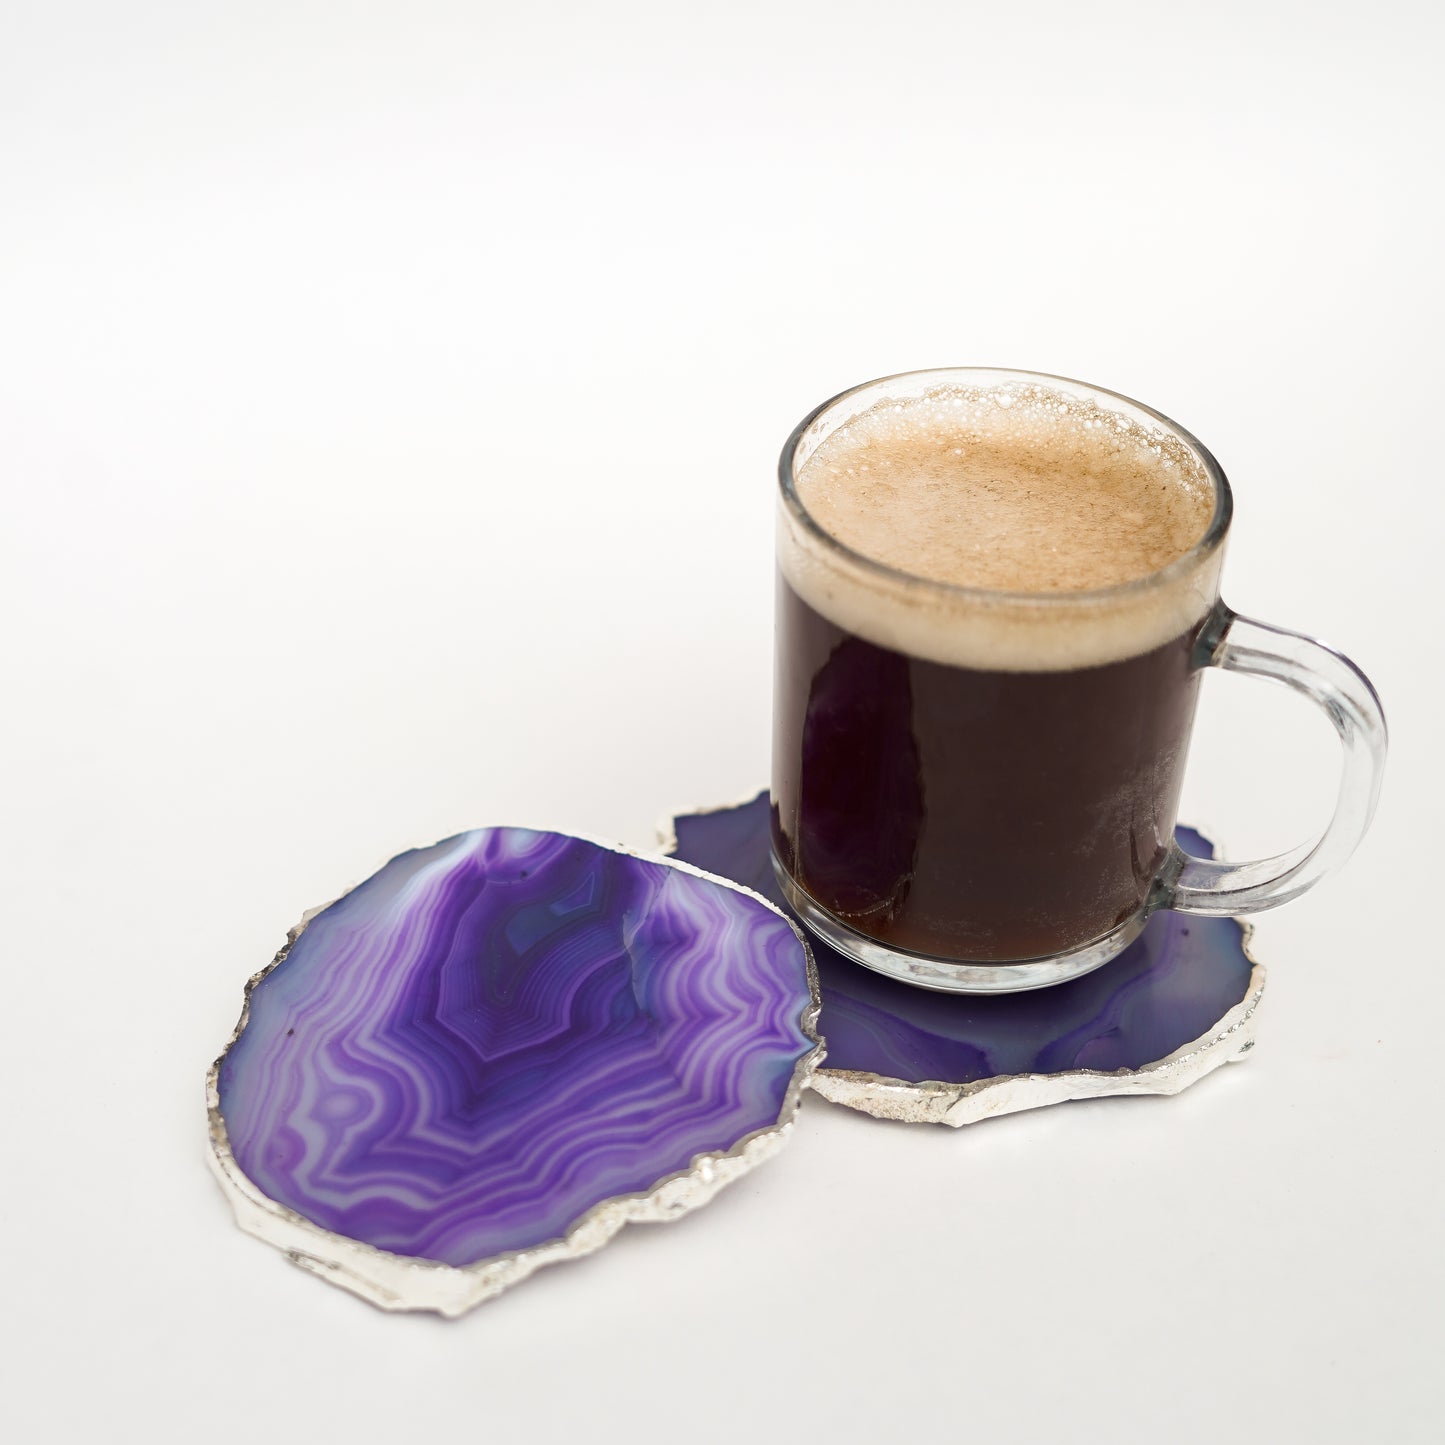 Brazilian Agate Stone Silver Plated Coaster Beautiful Coaster Fit for Tea Cups Coffee Mugs and Glasses Perfect Table Accessories Tableware Set of 2- Purple